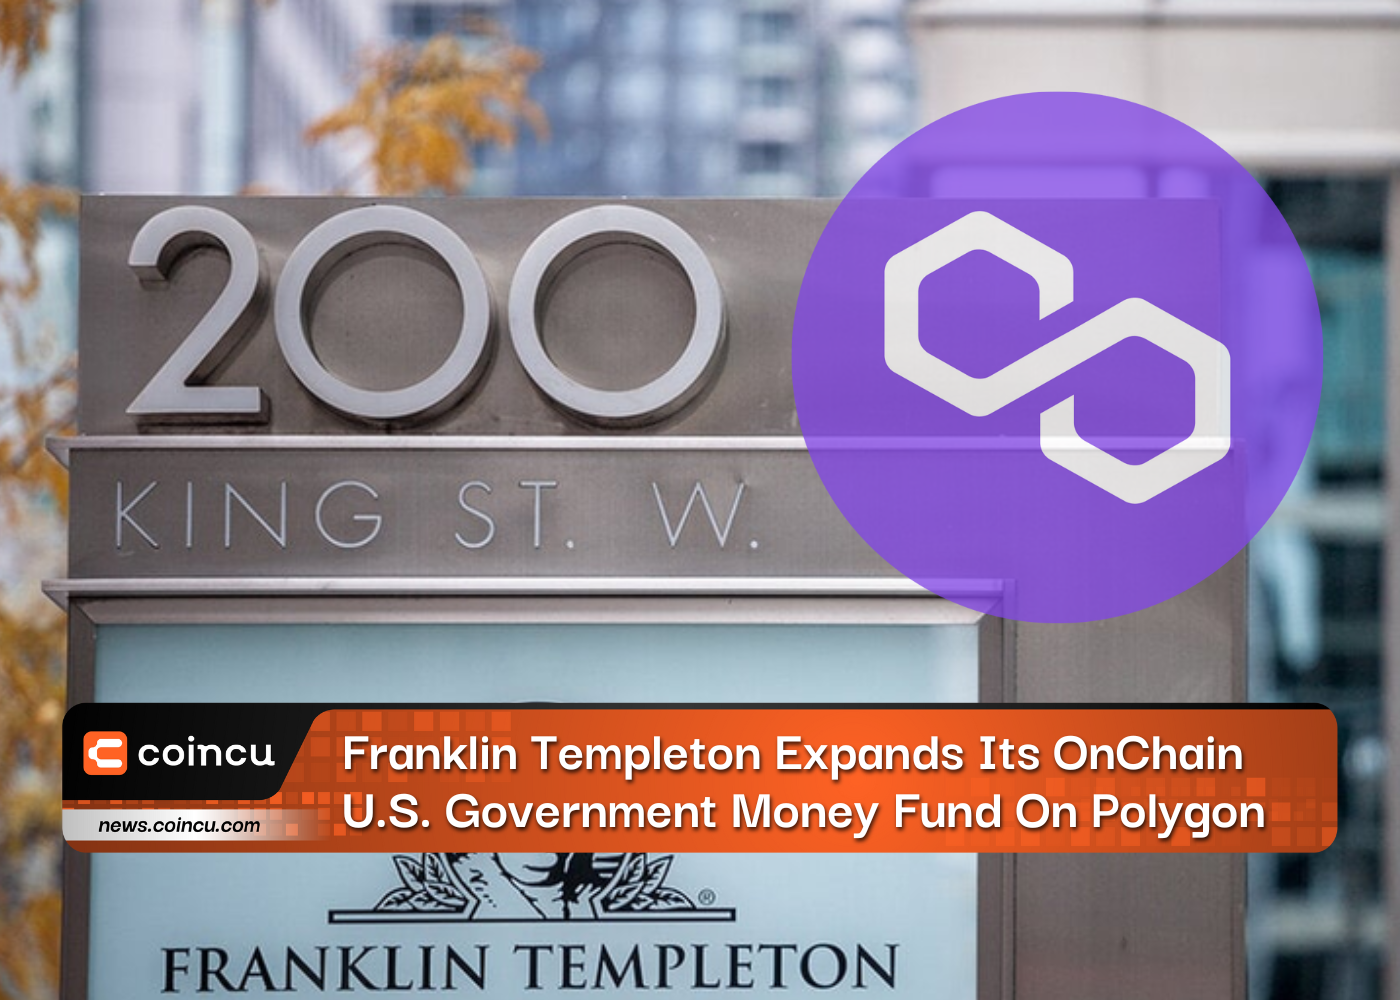 Franklin Templeton Expands Its OnChain U.S. Government Money Fund On Polygon